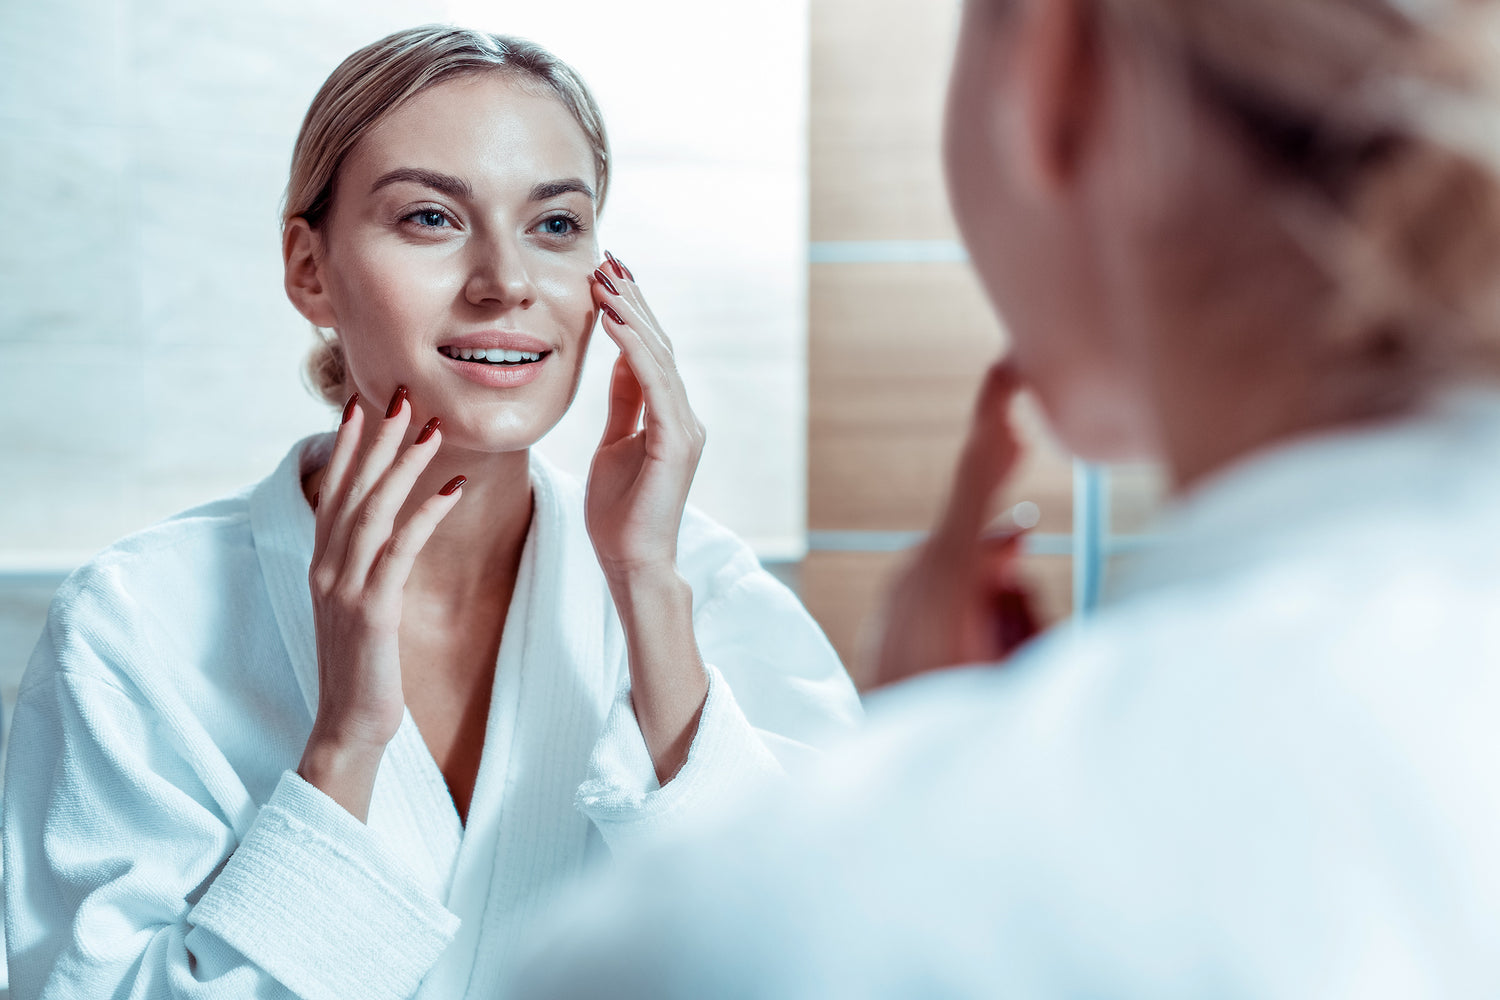 Facial Fitness 101: the Secret to Ageless Beauty Revealed